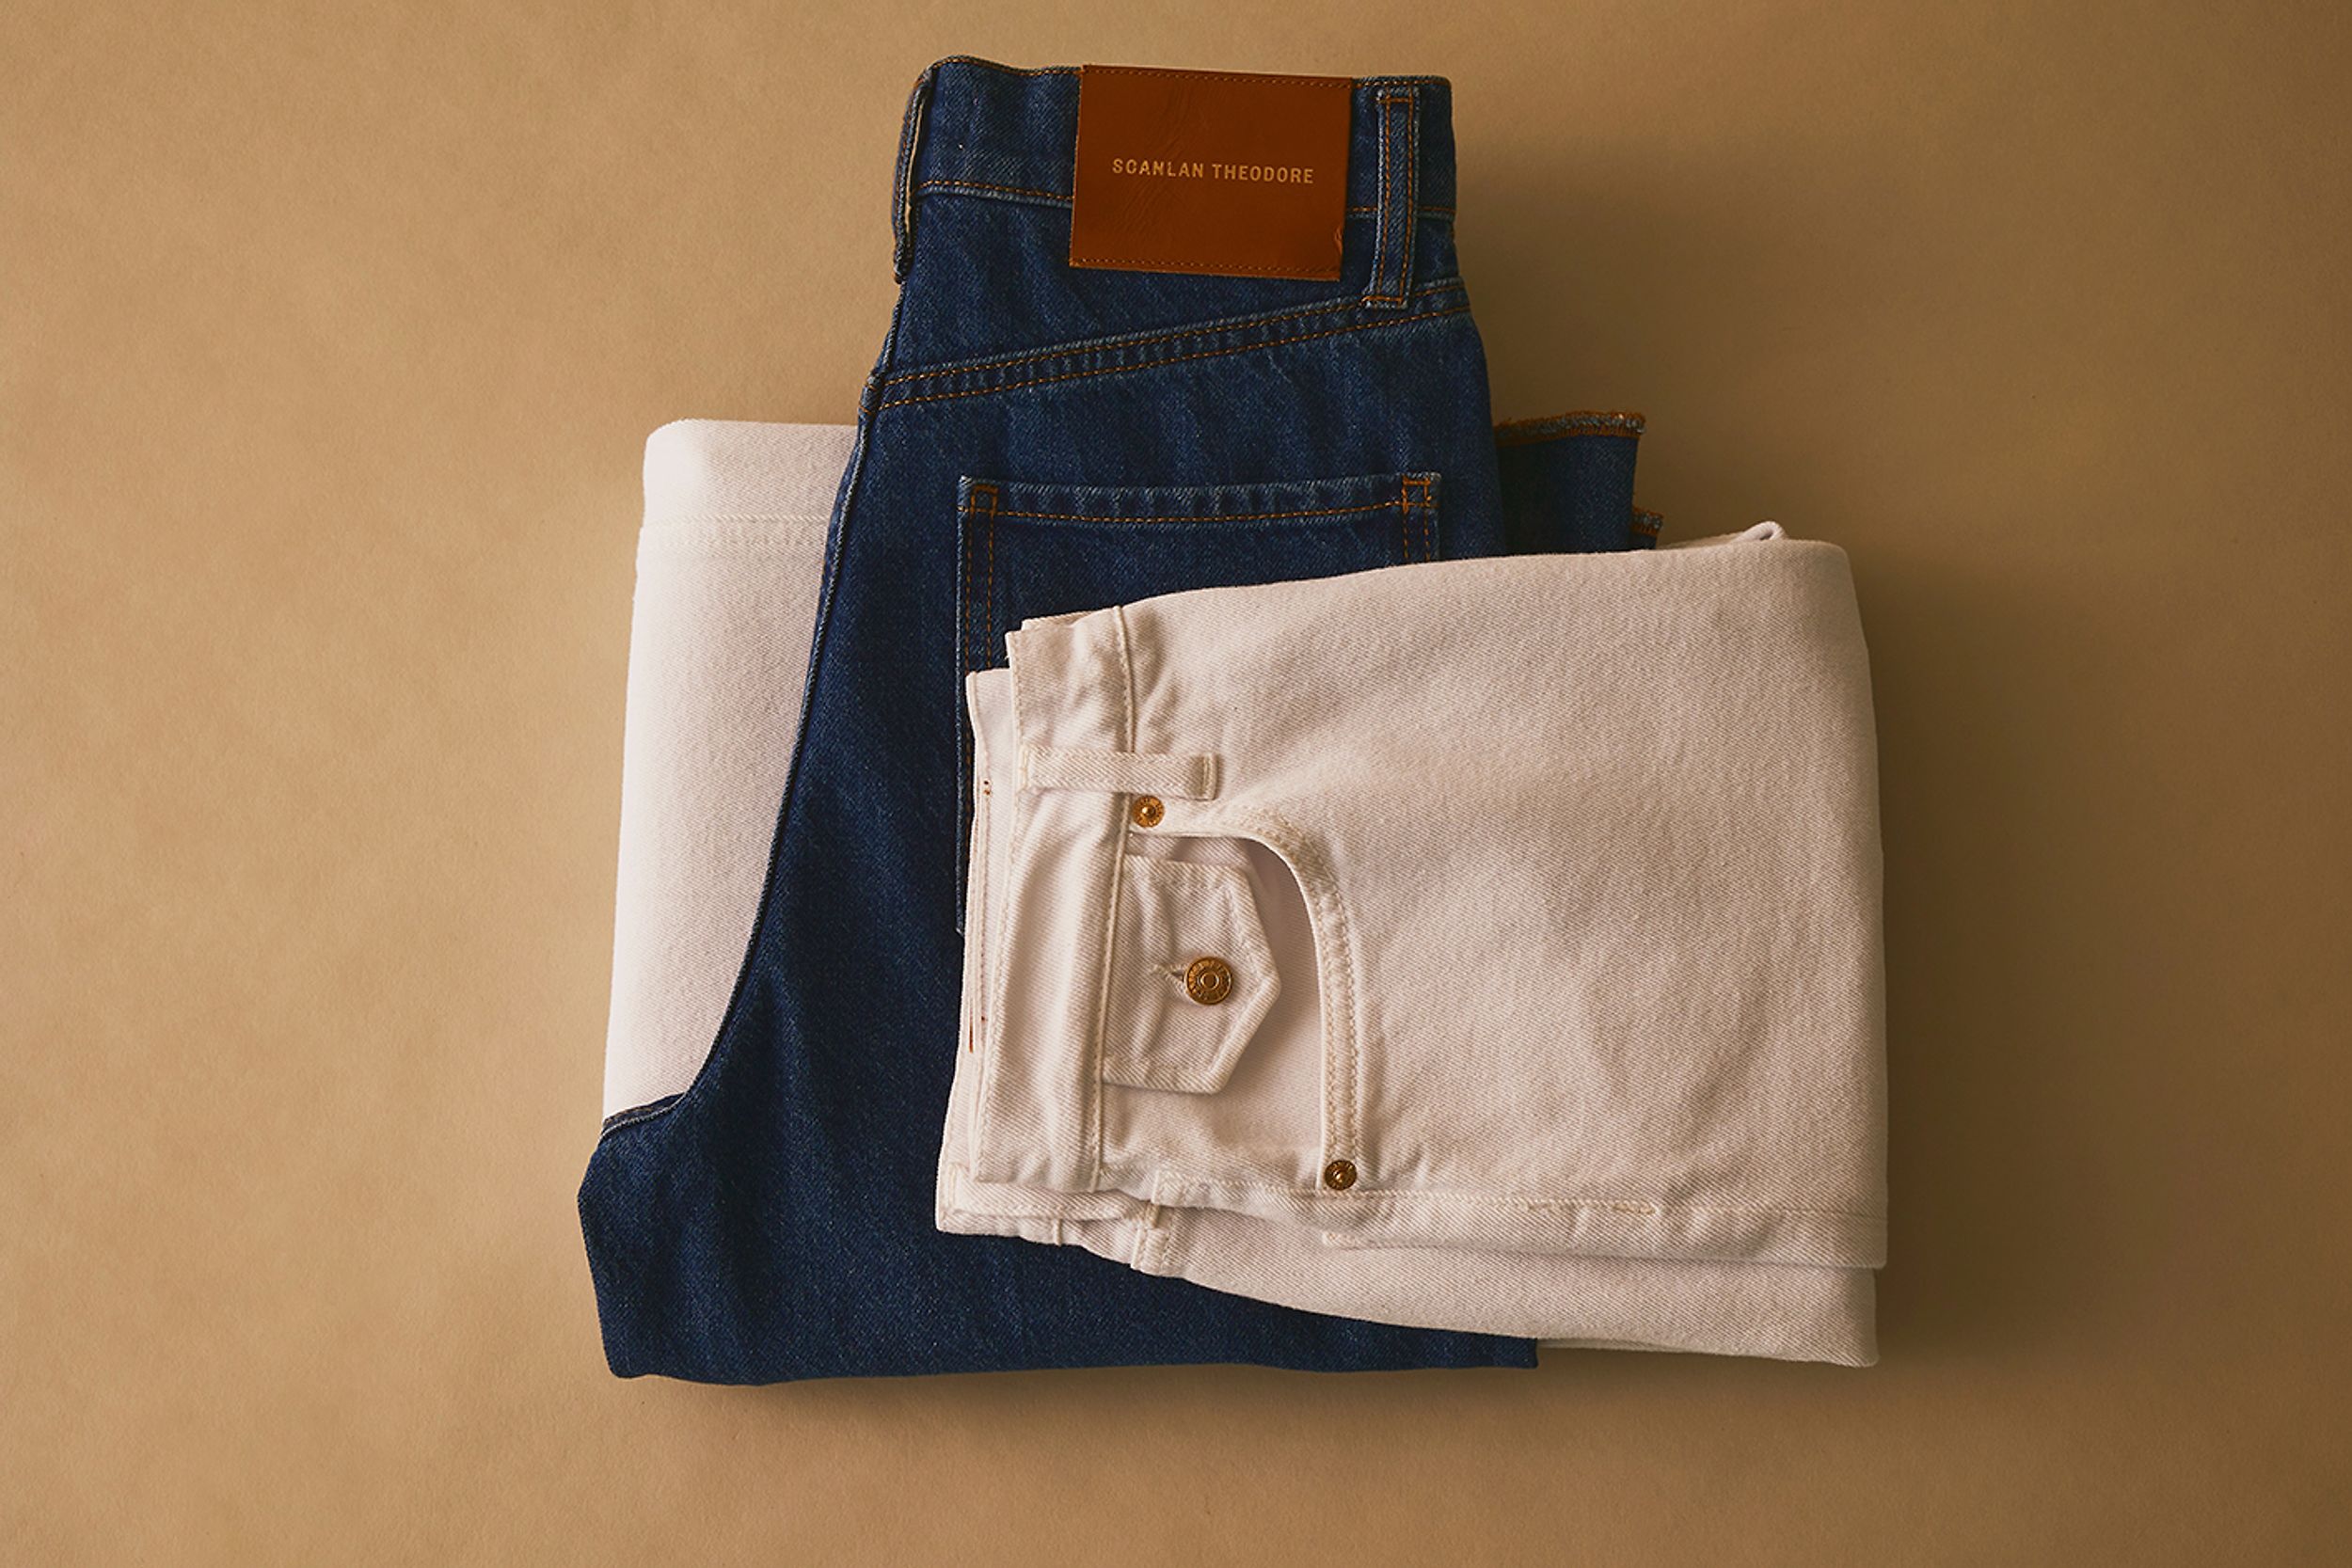 Scanlan Theodore denim jeans folded and stacked on top of each other in range of colours.